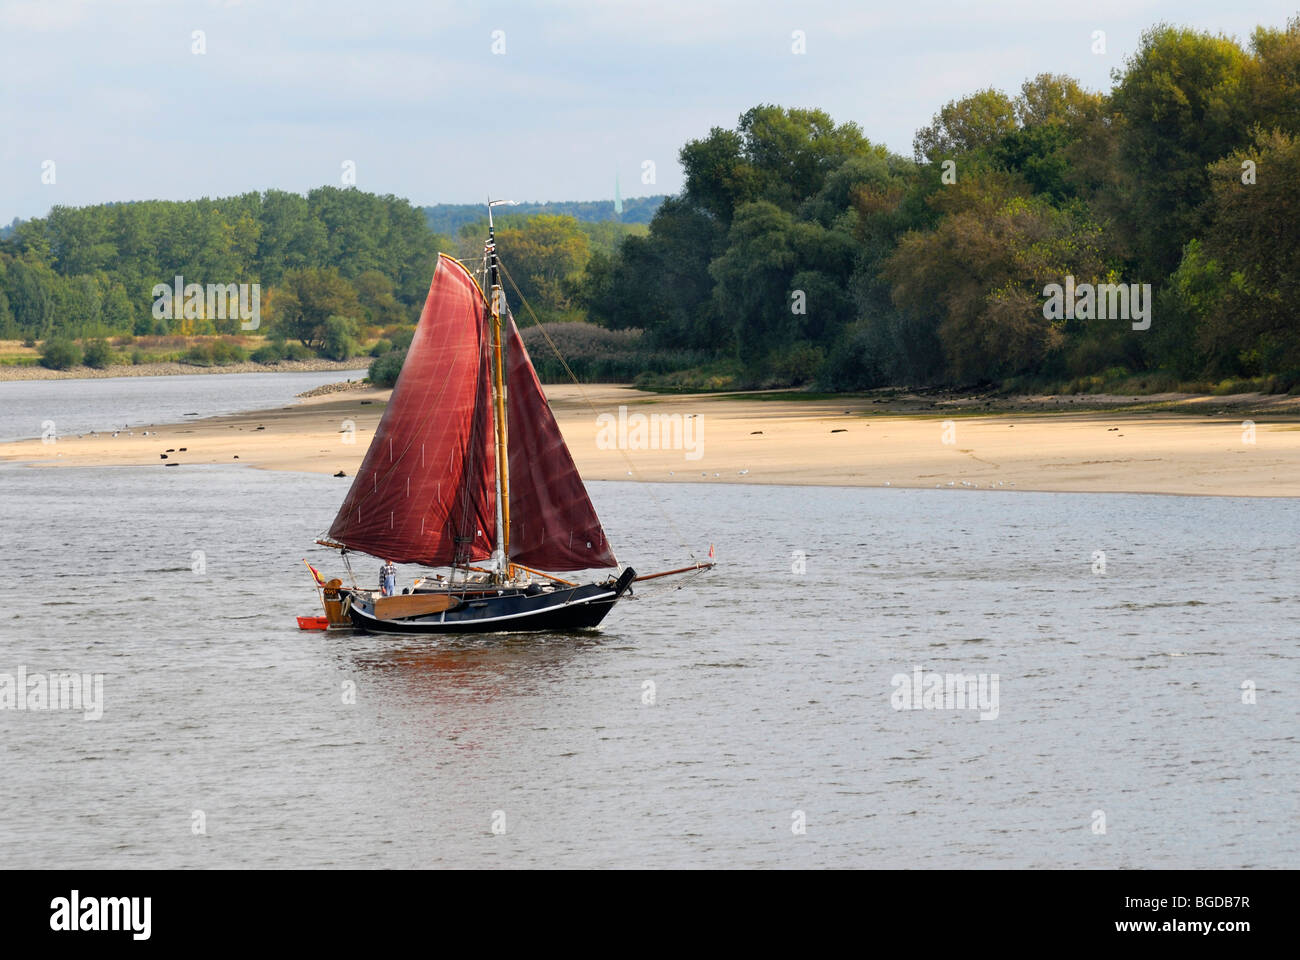 Sailboat on the river Elbe in Altengamme, Hamburg, Germany, Europe Stock Photo